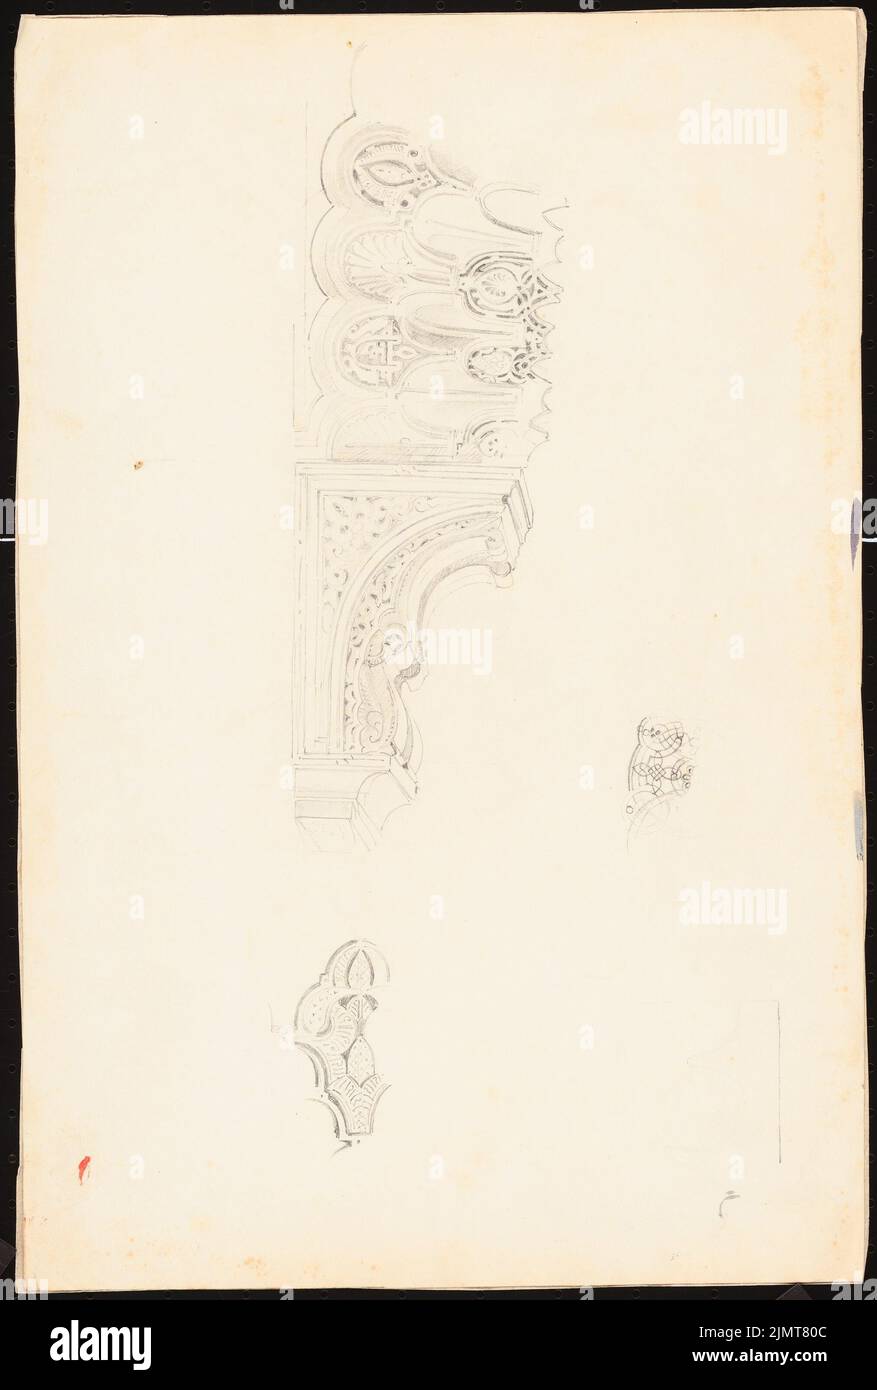 Diebitsch Carl von (1819-1869), Alhambra, Granada. (?) (Without dat.): 3 details, fighter with a transition to the arch form. Pencil on cardboard, 40.2 x 27.1 cm (including scan edges) Diebitsch Carl von  (1819-1869): Alhambra, Granada (?) Stock Photo